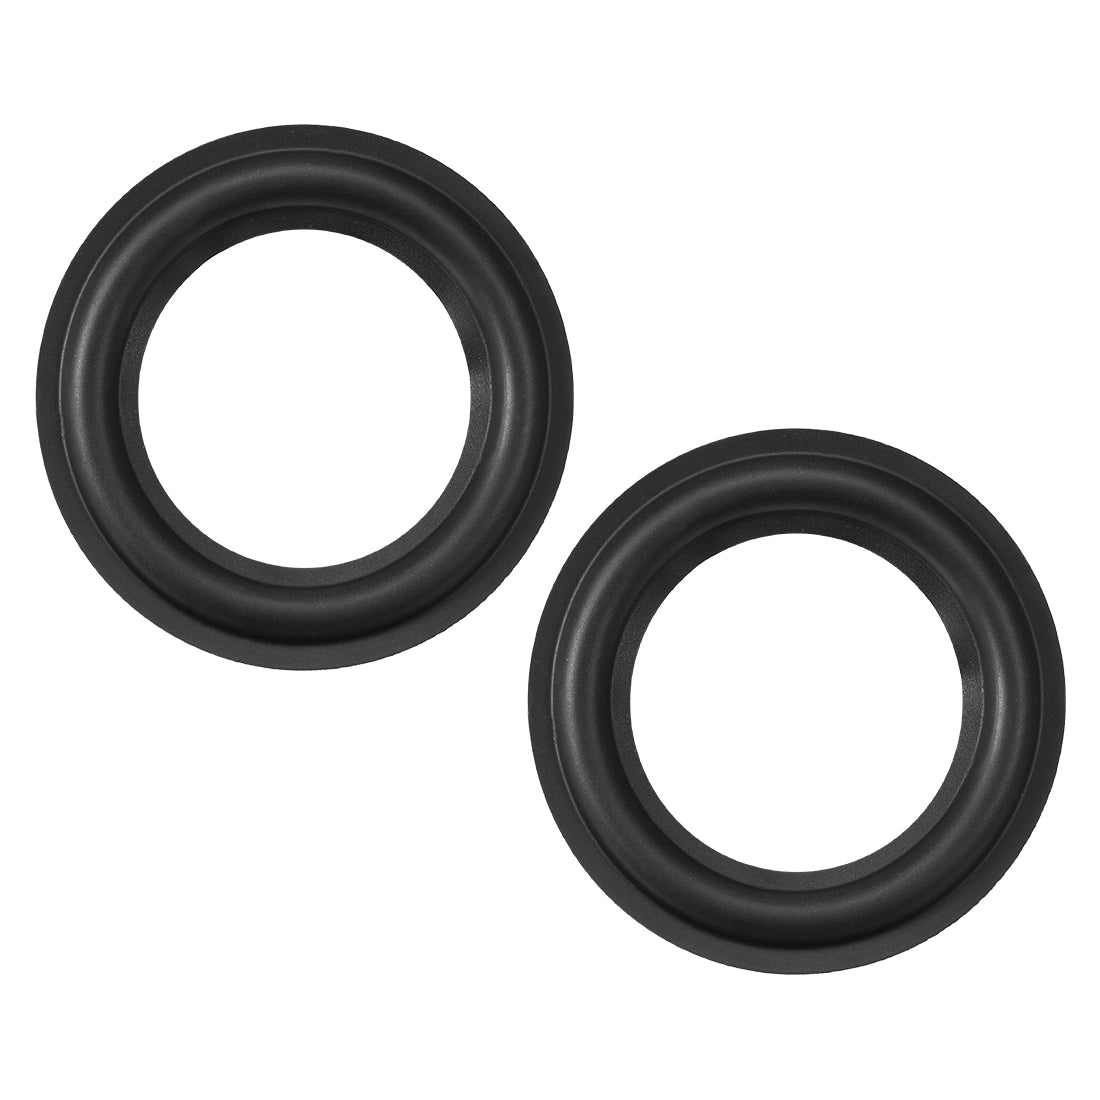 uxcell Uxcell 3inch Speaker Rubber Edge Surround Rings Replacement Parts for Speaker Repair or DIY 2pcs